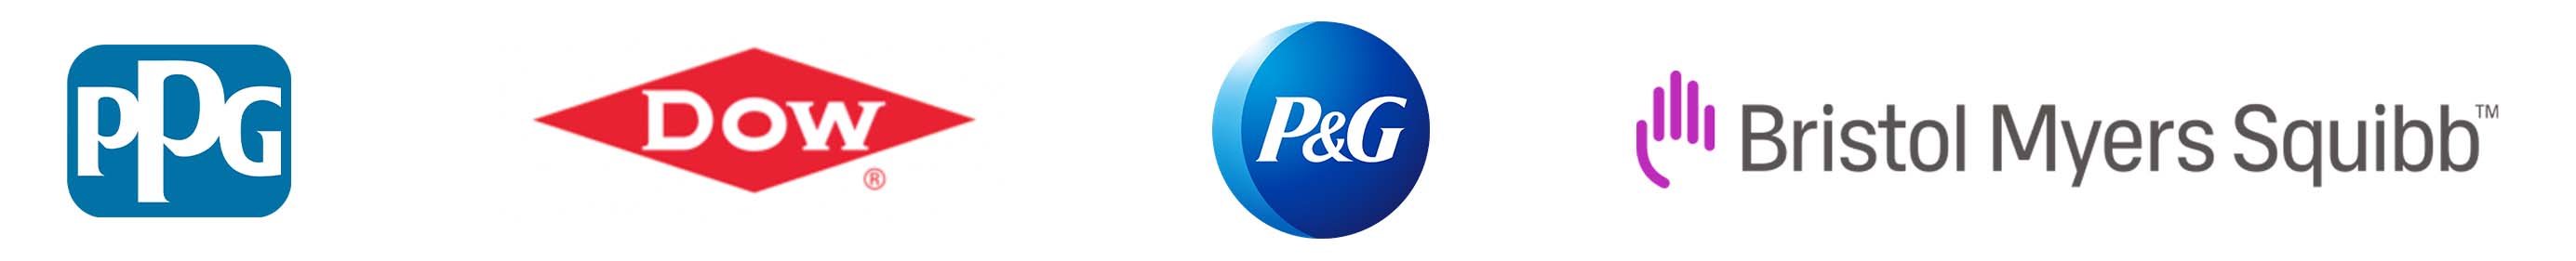 company logos - PPG, Proctor and Gamble, Dow, Bristol Meyers Squibb